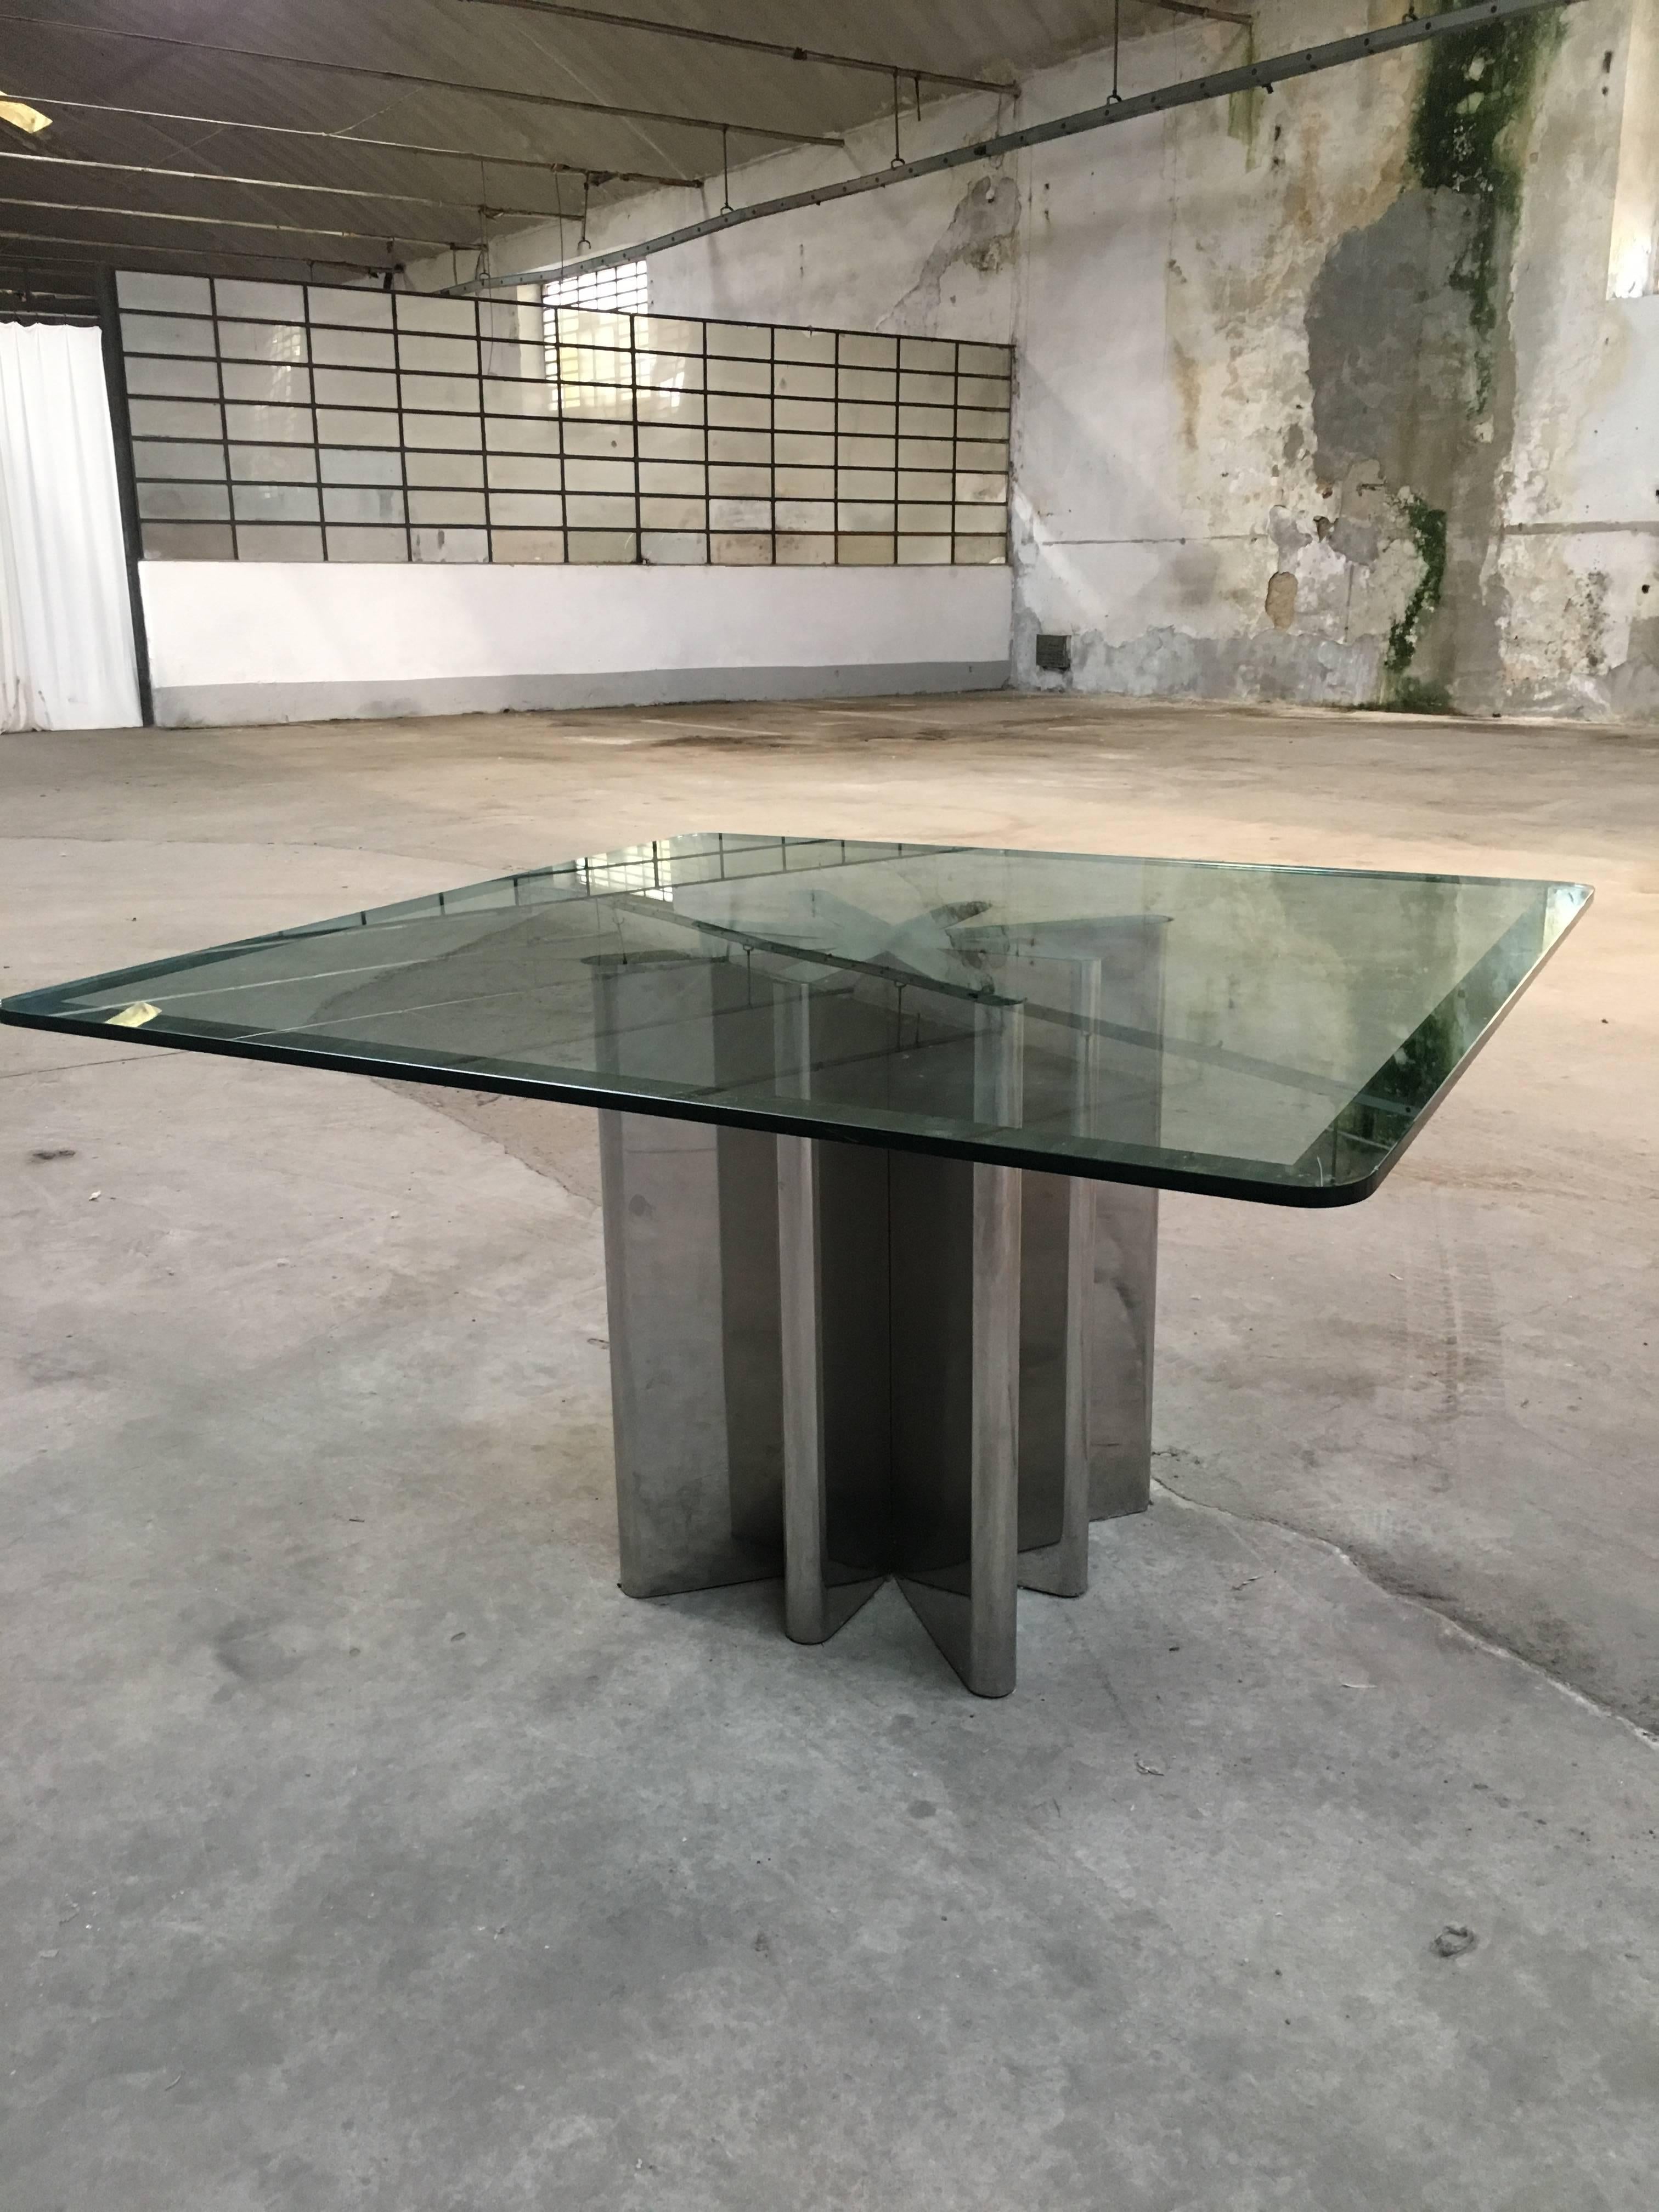 Mid-Century Modern Italian Table with Chrome Base and Silver Framed Glass Top from 1970s